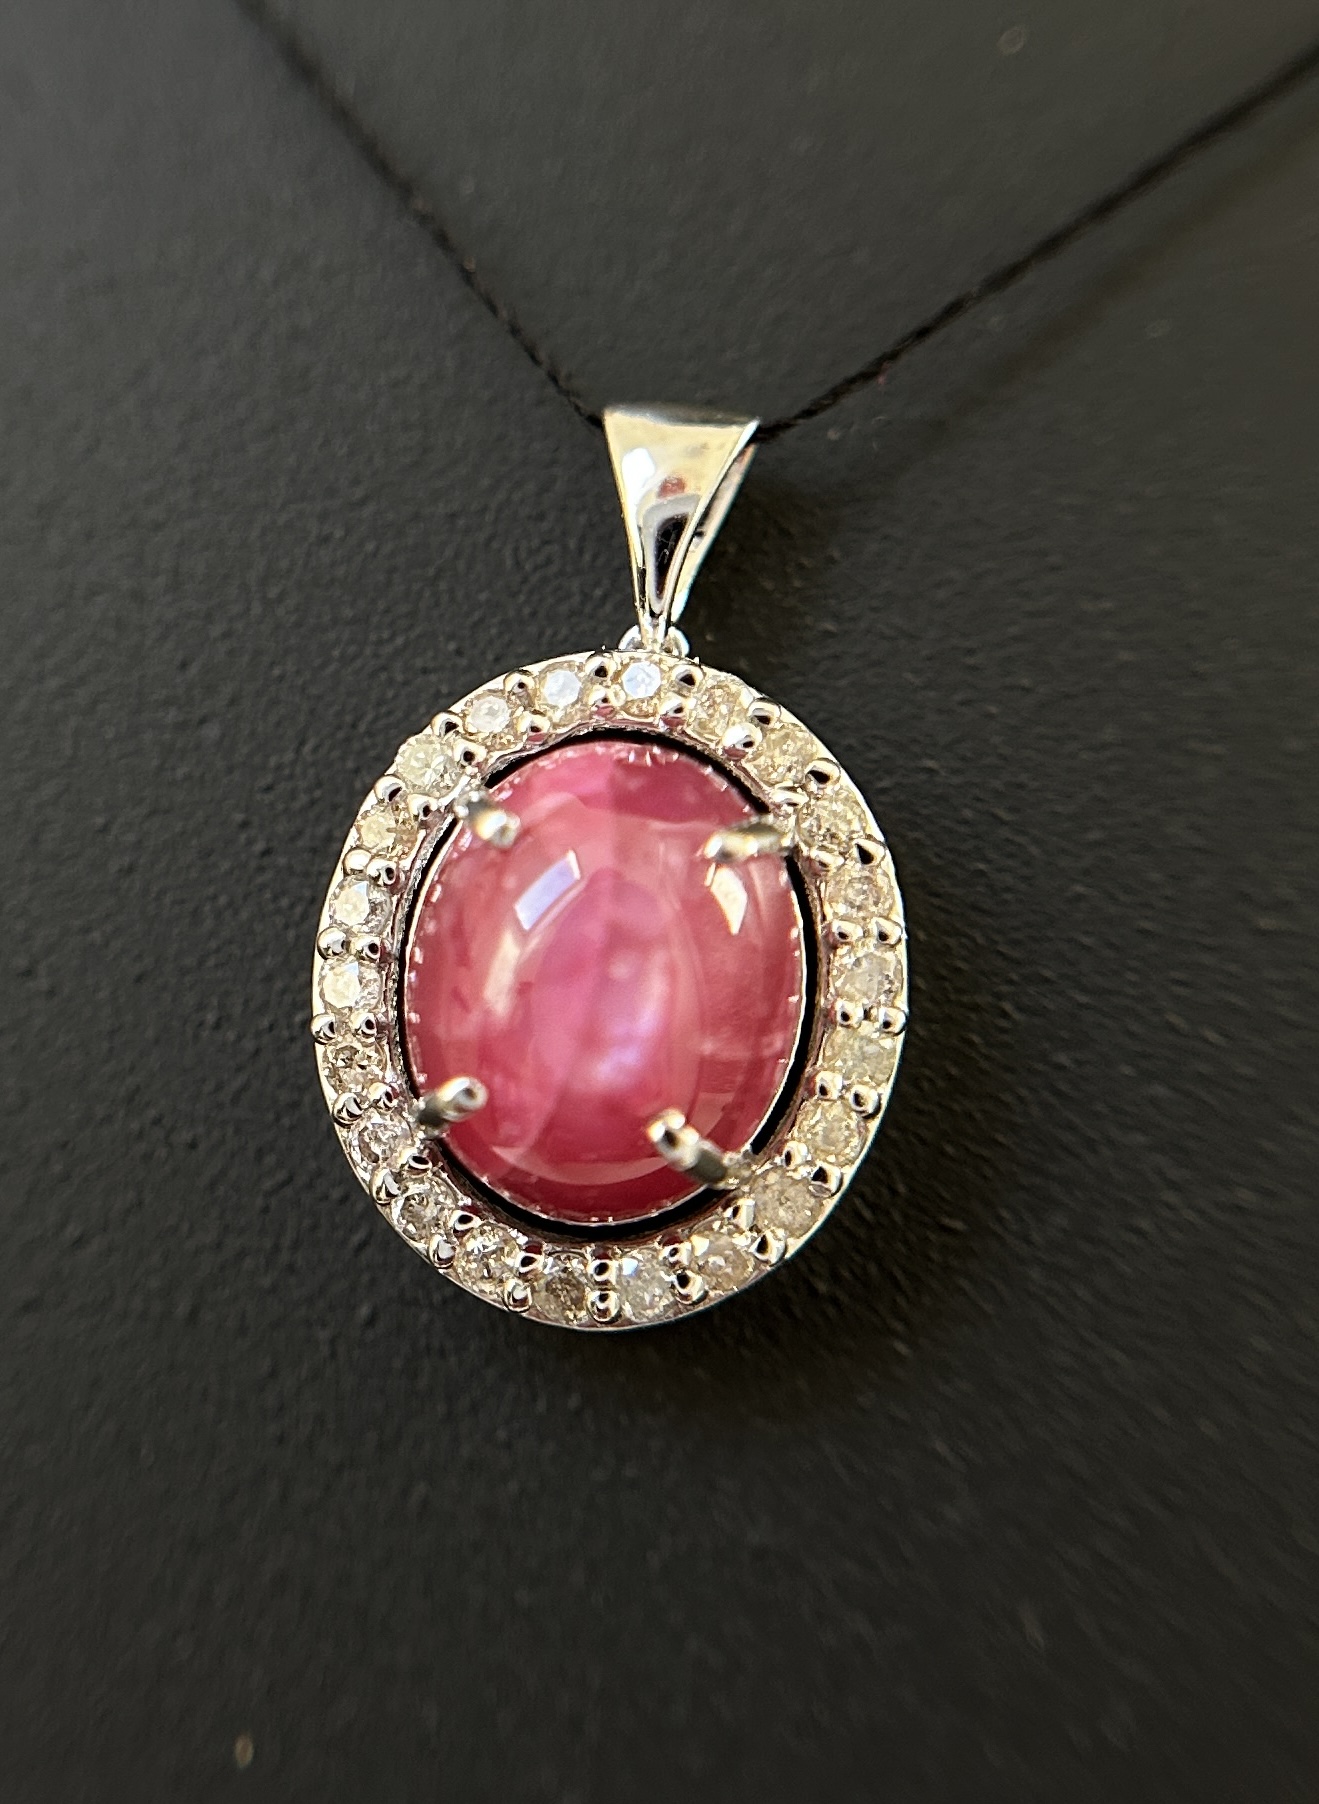 Beautiful Natural Star Ruby Pendant 2.35Ct With Natural Diamonds & 18k Gold - Image 6 of 10